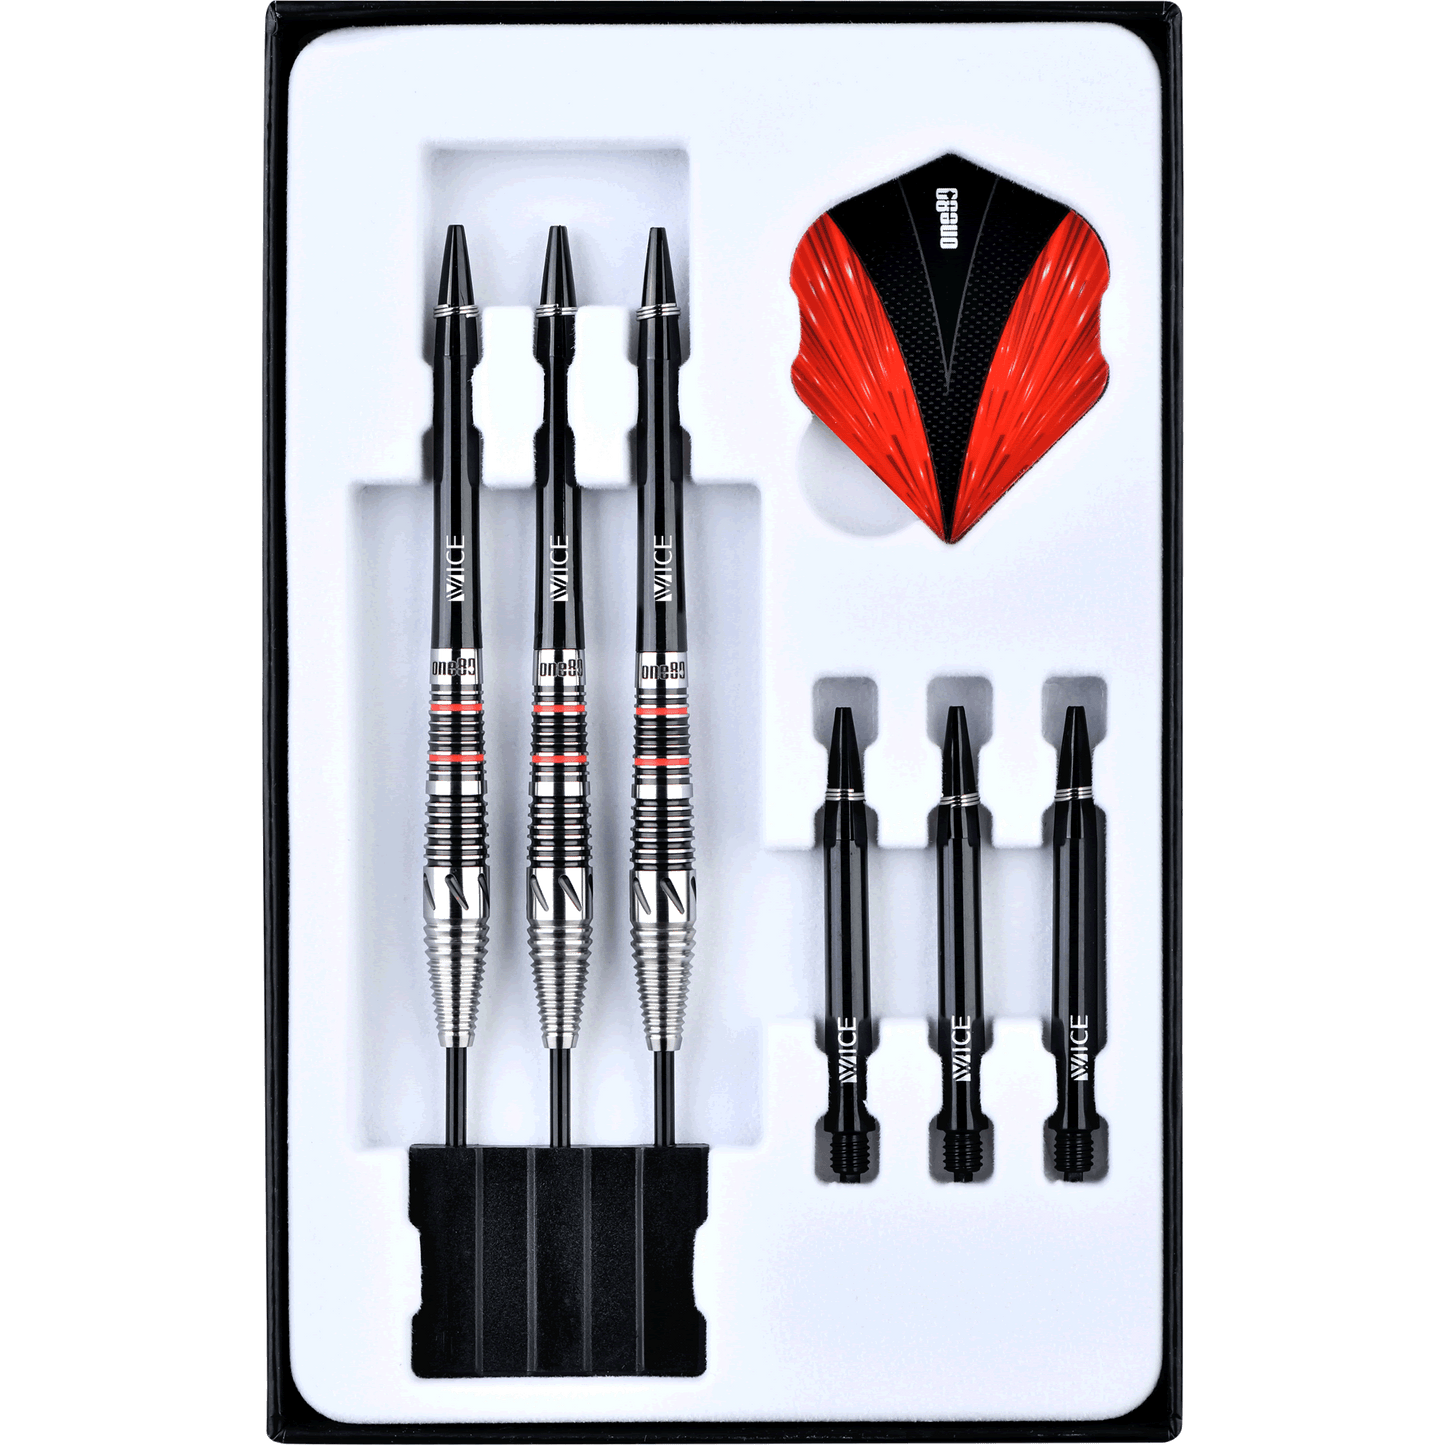 One80 Mick Lacey Darts - Steel Tip - Lone Wolf - Black & Red - 23.5g 23g